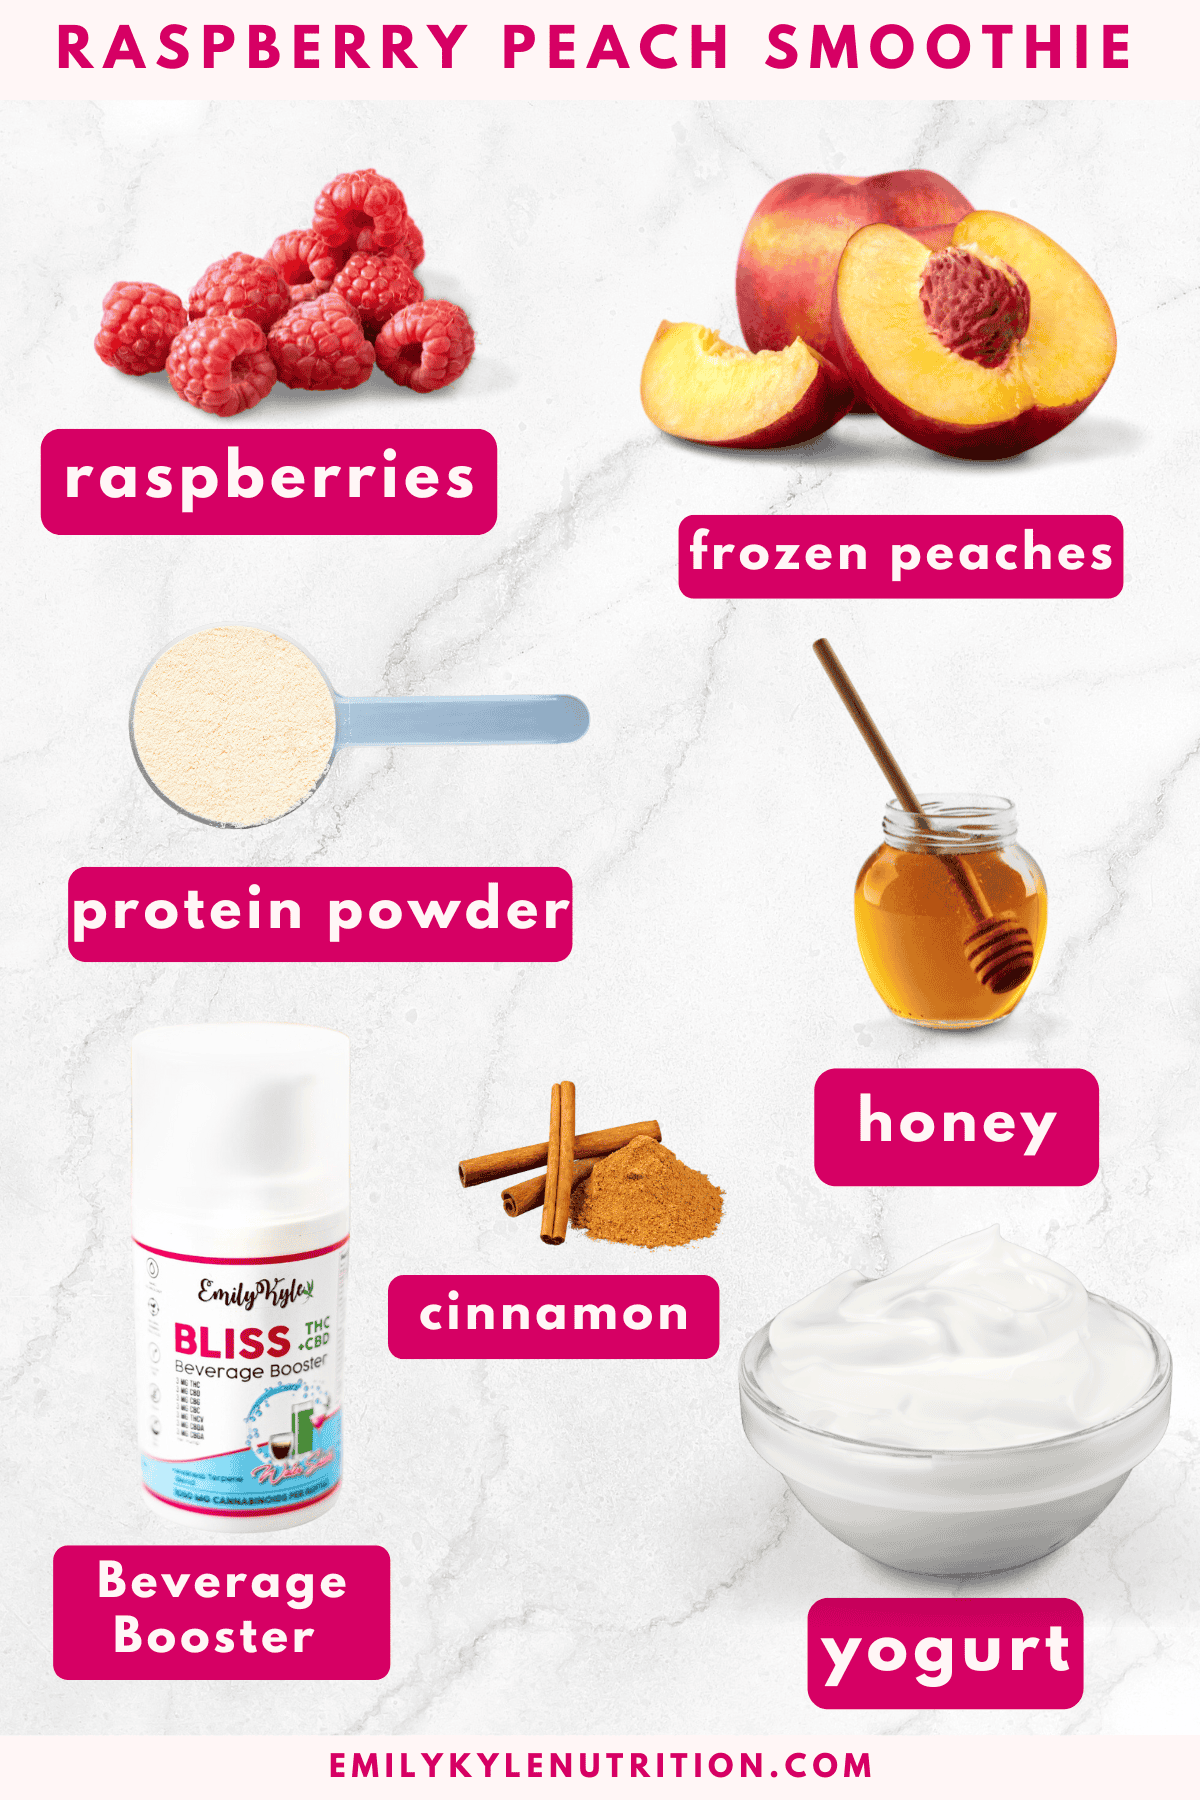 The ingredients needed to make a cannabis-infused peach smoothie.